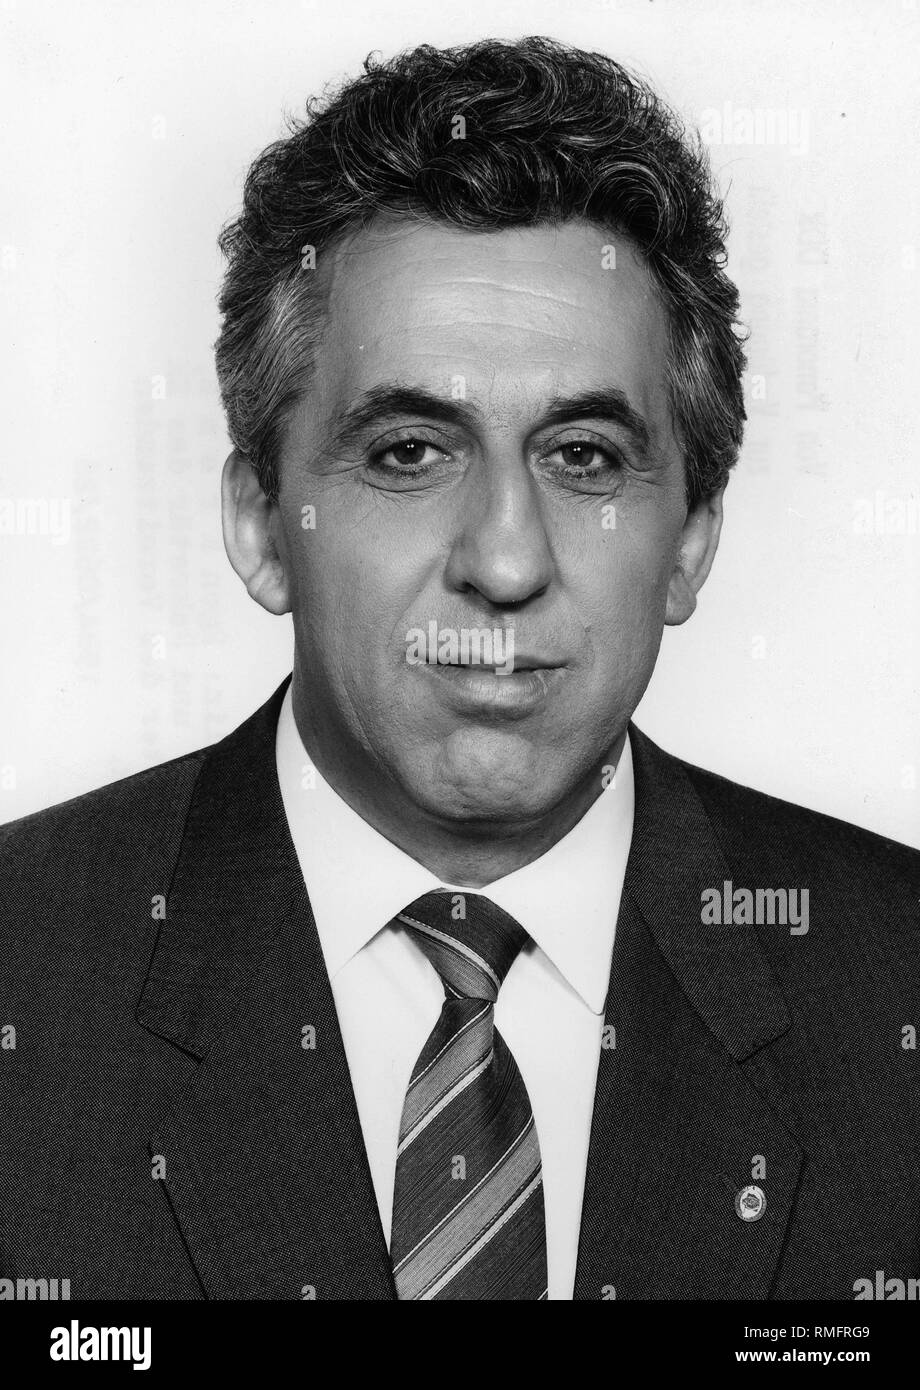 Egon Krenz - * 19.03.1937, between 1974 - 1983 was chairman of the youth organization FDJ, between 1983 - 1989 member of the SED Politburo, between 18.10.1989 - 03.12.1989 Secretary General of SED, between 24.10.1989 - 06.12.1989 State Council Chairman of the GDR. Stock Photo